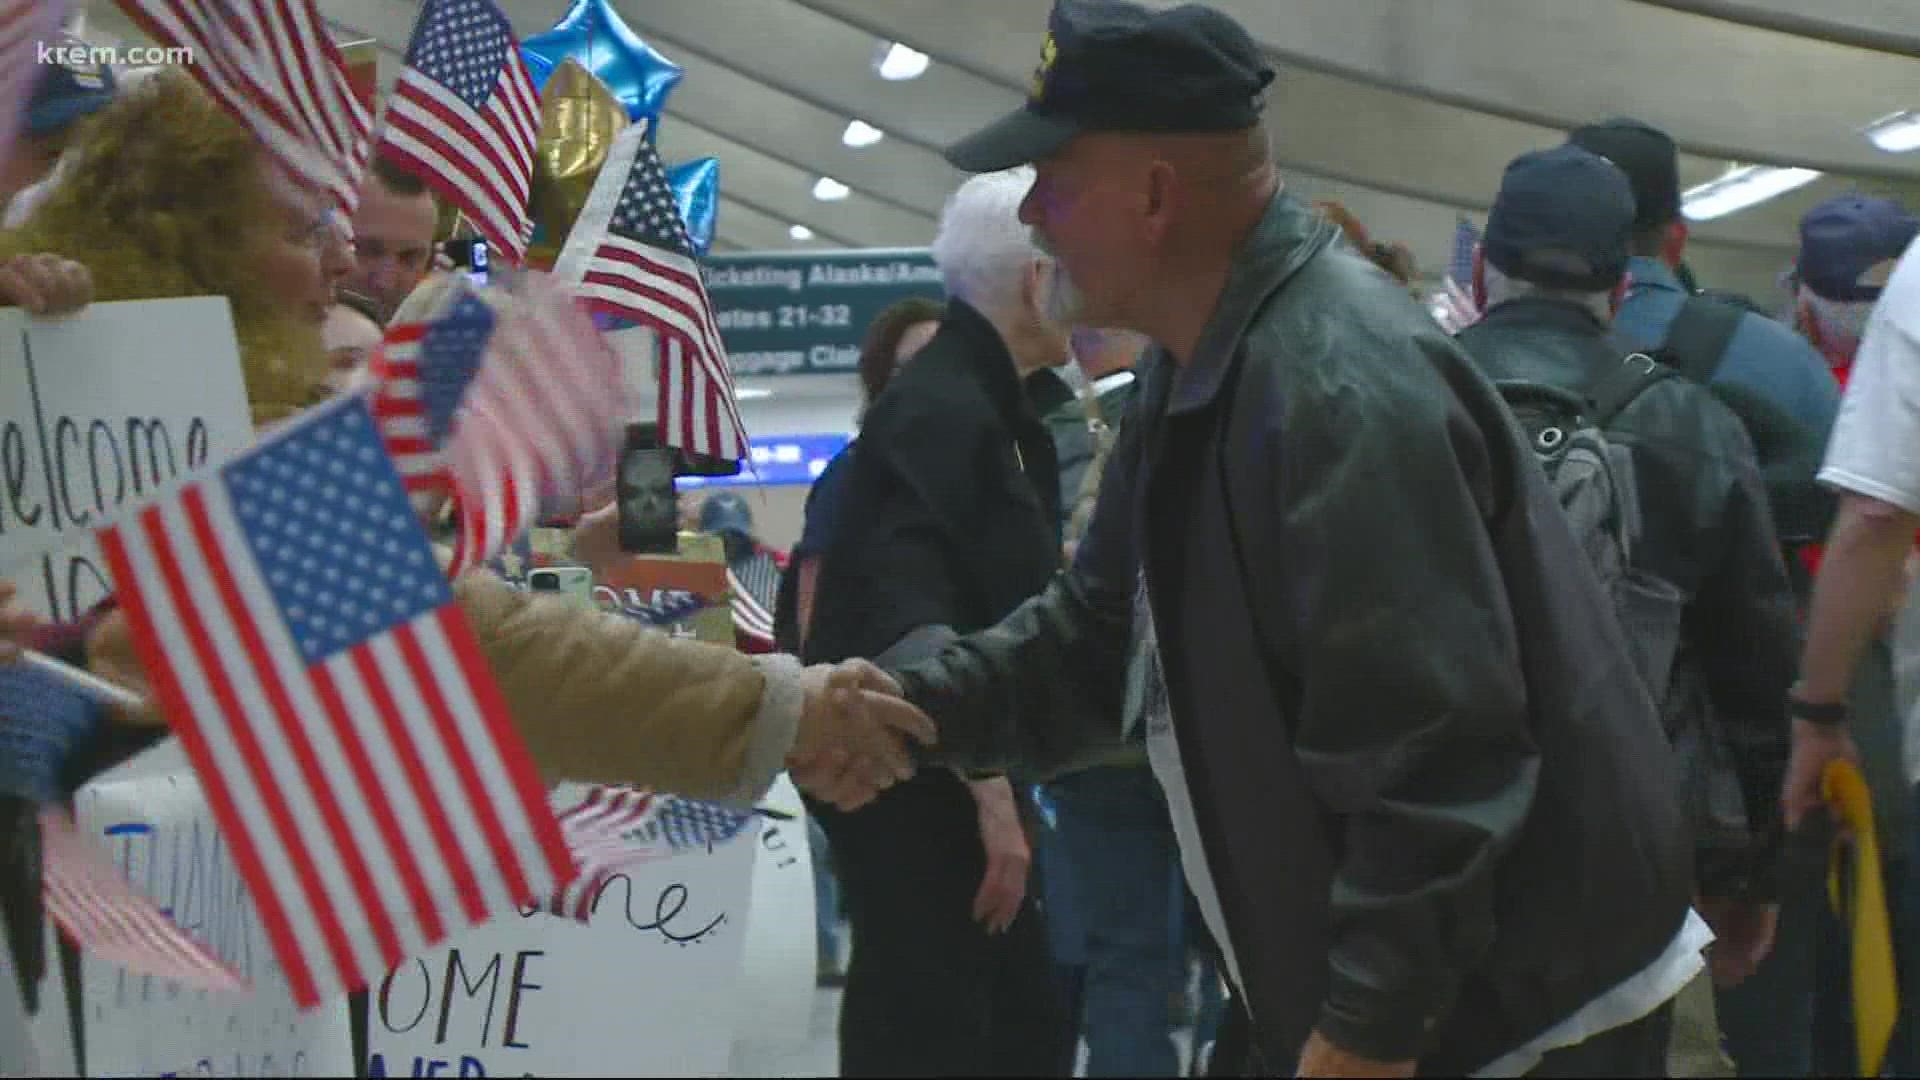 KREM 2 Photographer Dave Somers helped capture the ovation the veterans received upon returning home.